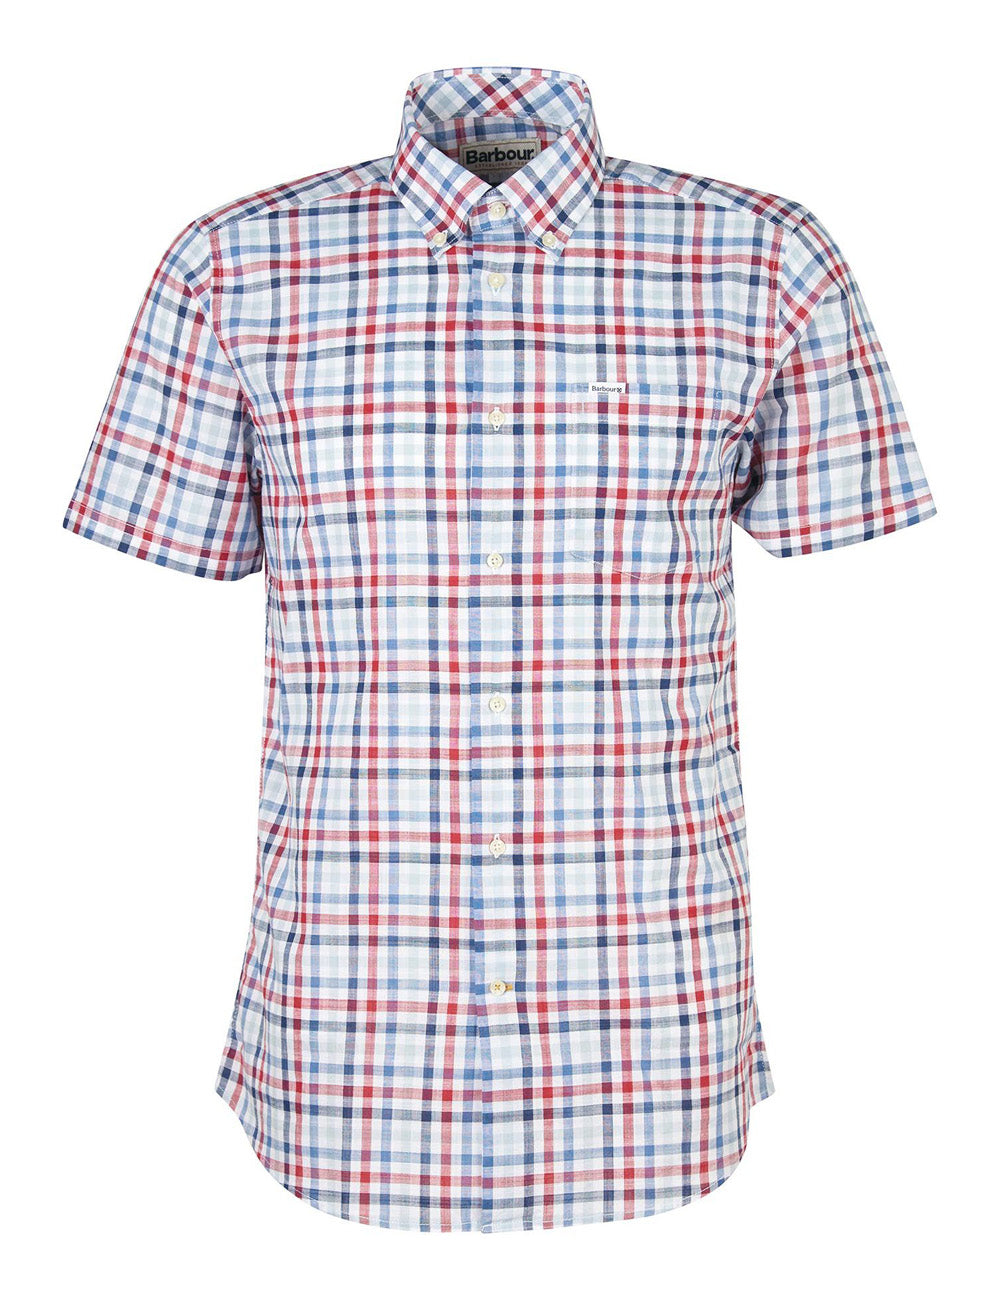 Barbour's Kinson Shirt on a white background